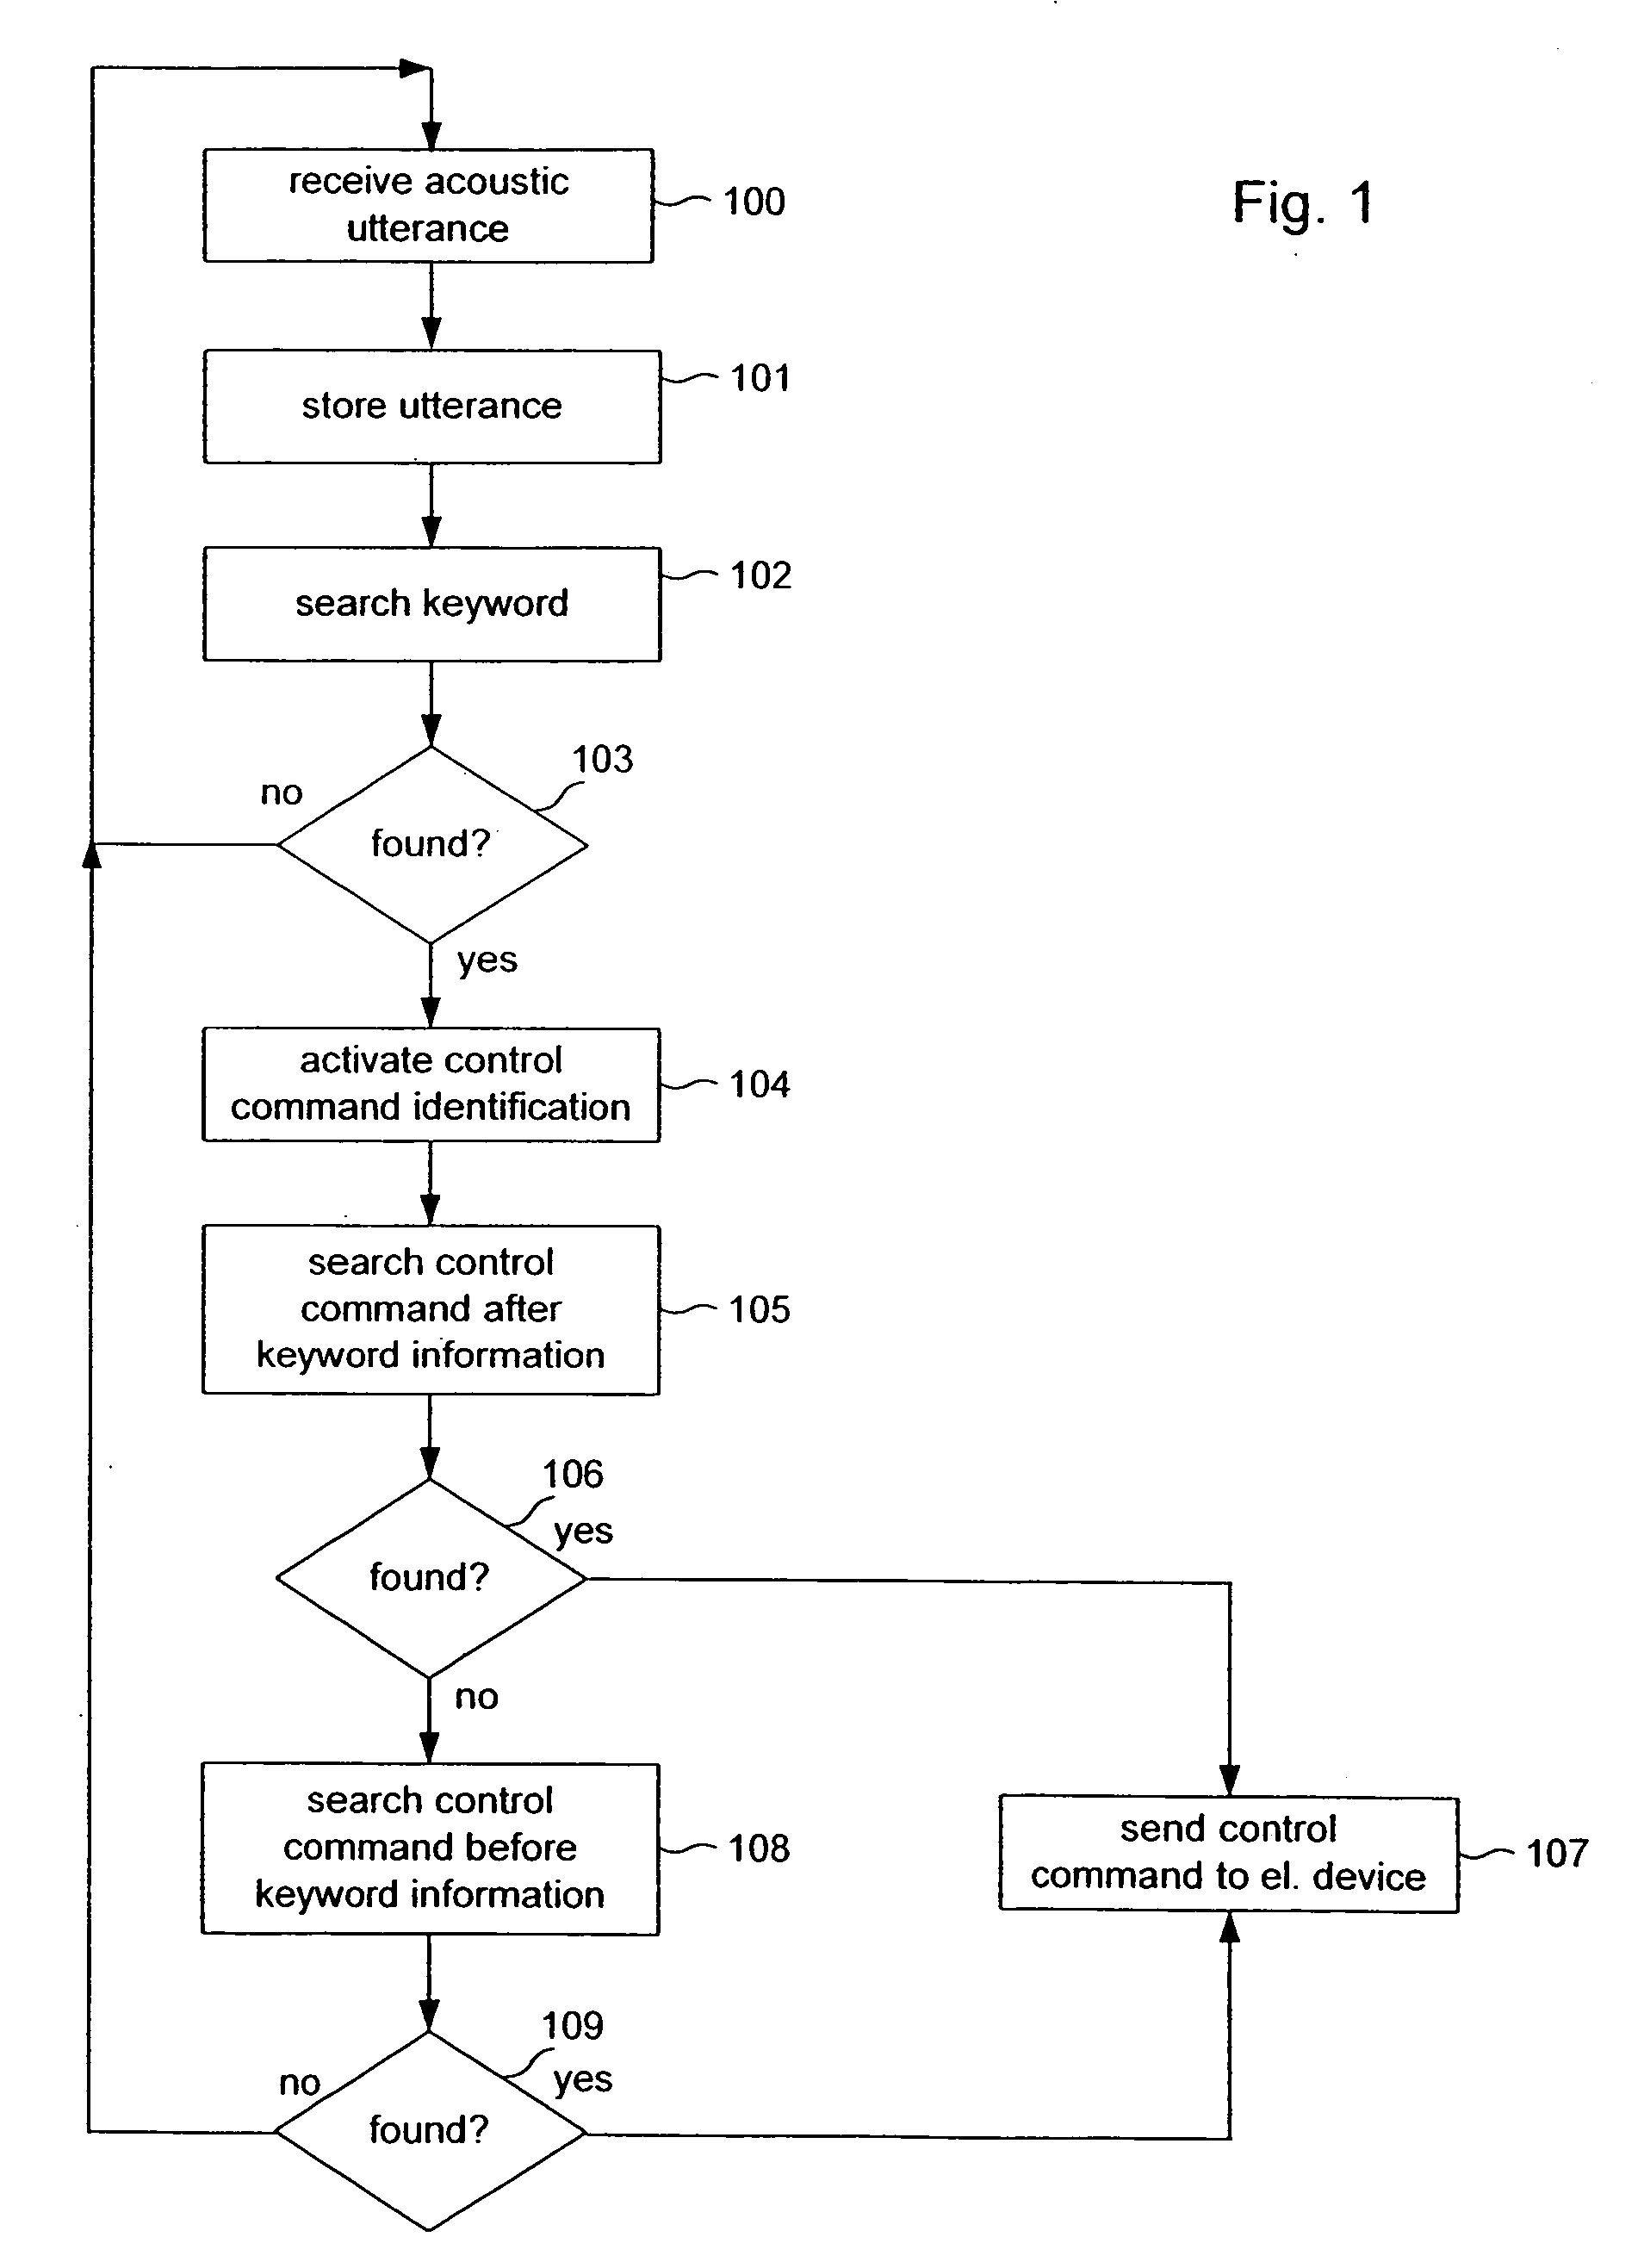 Speech dialogue system for controlling an electronic device